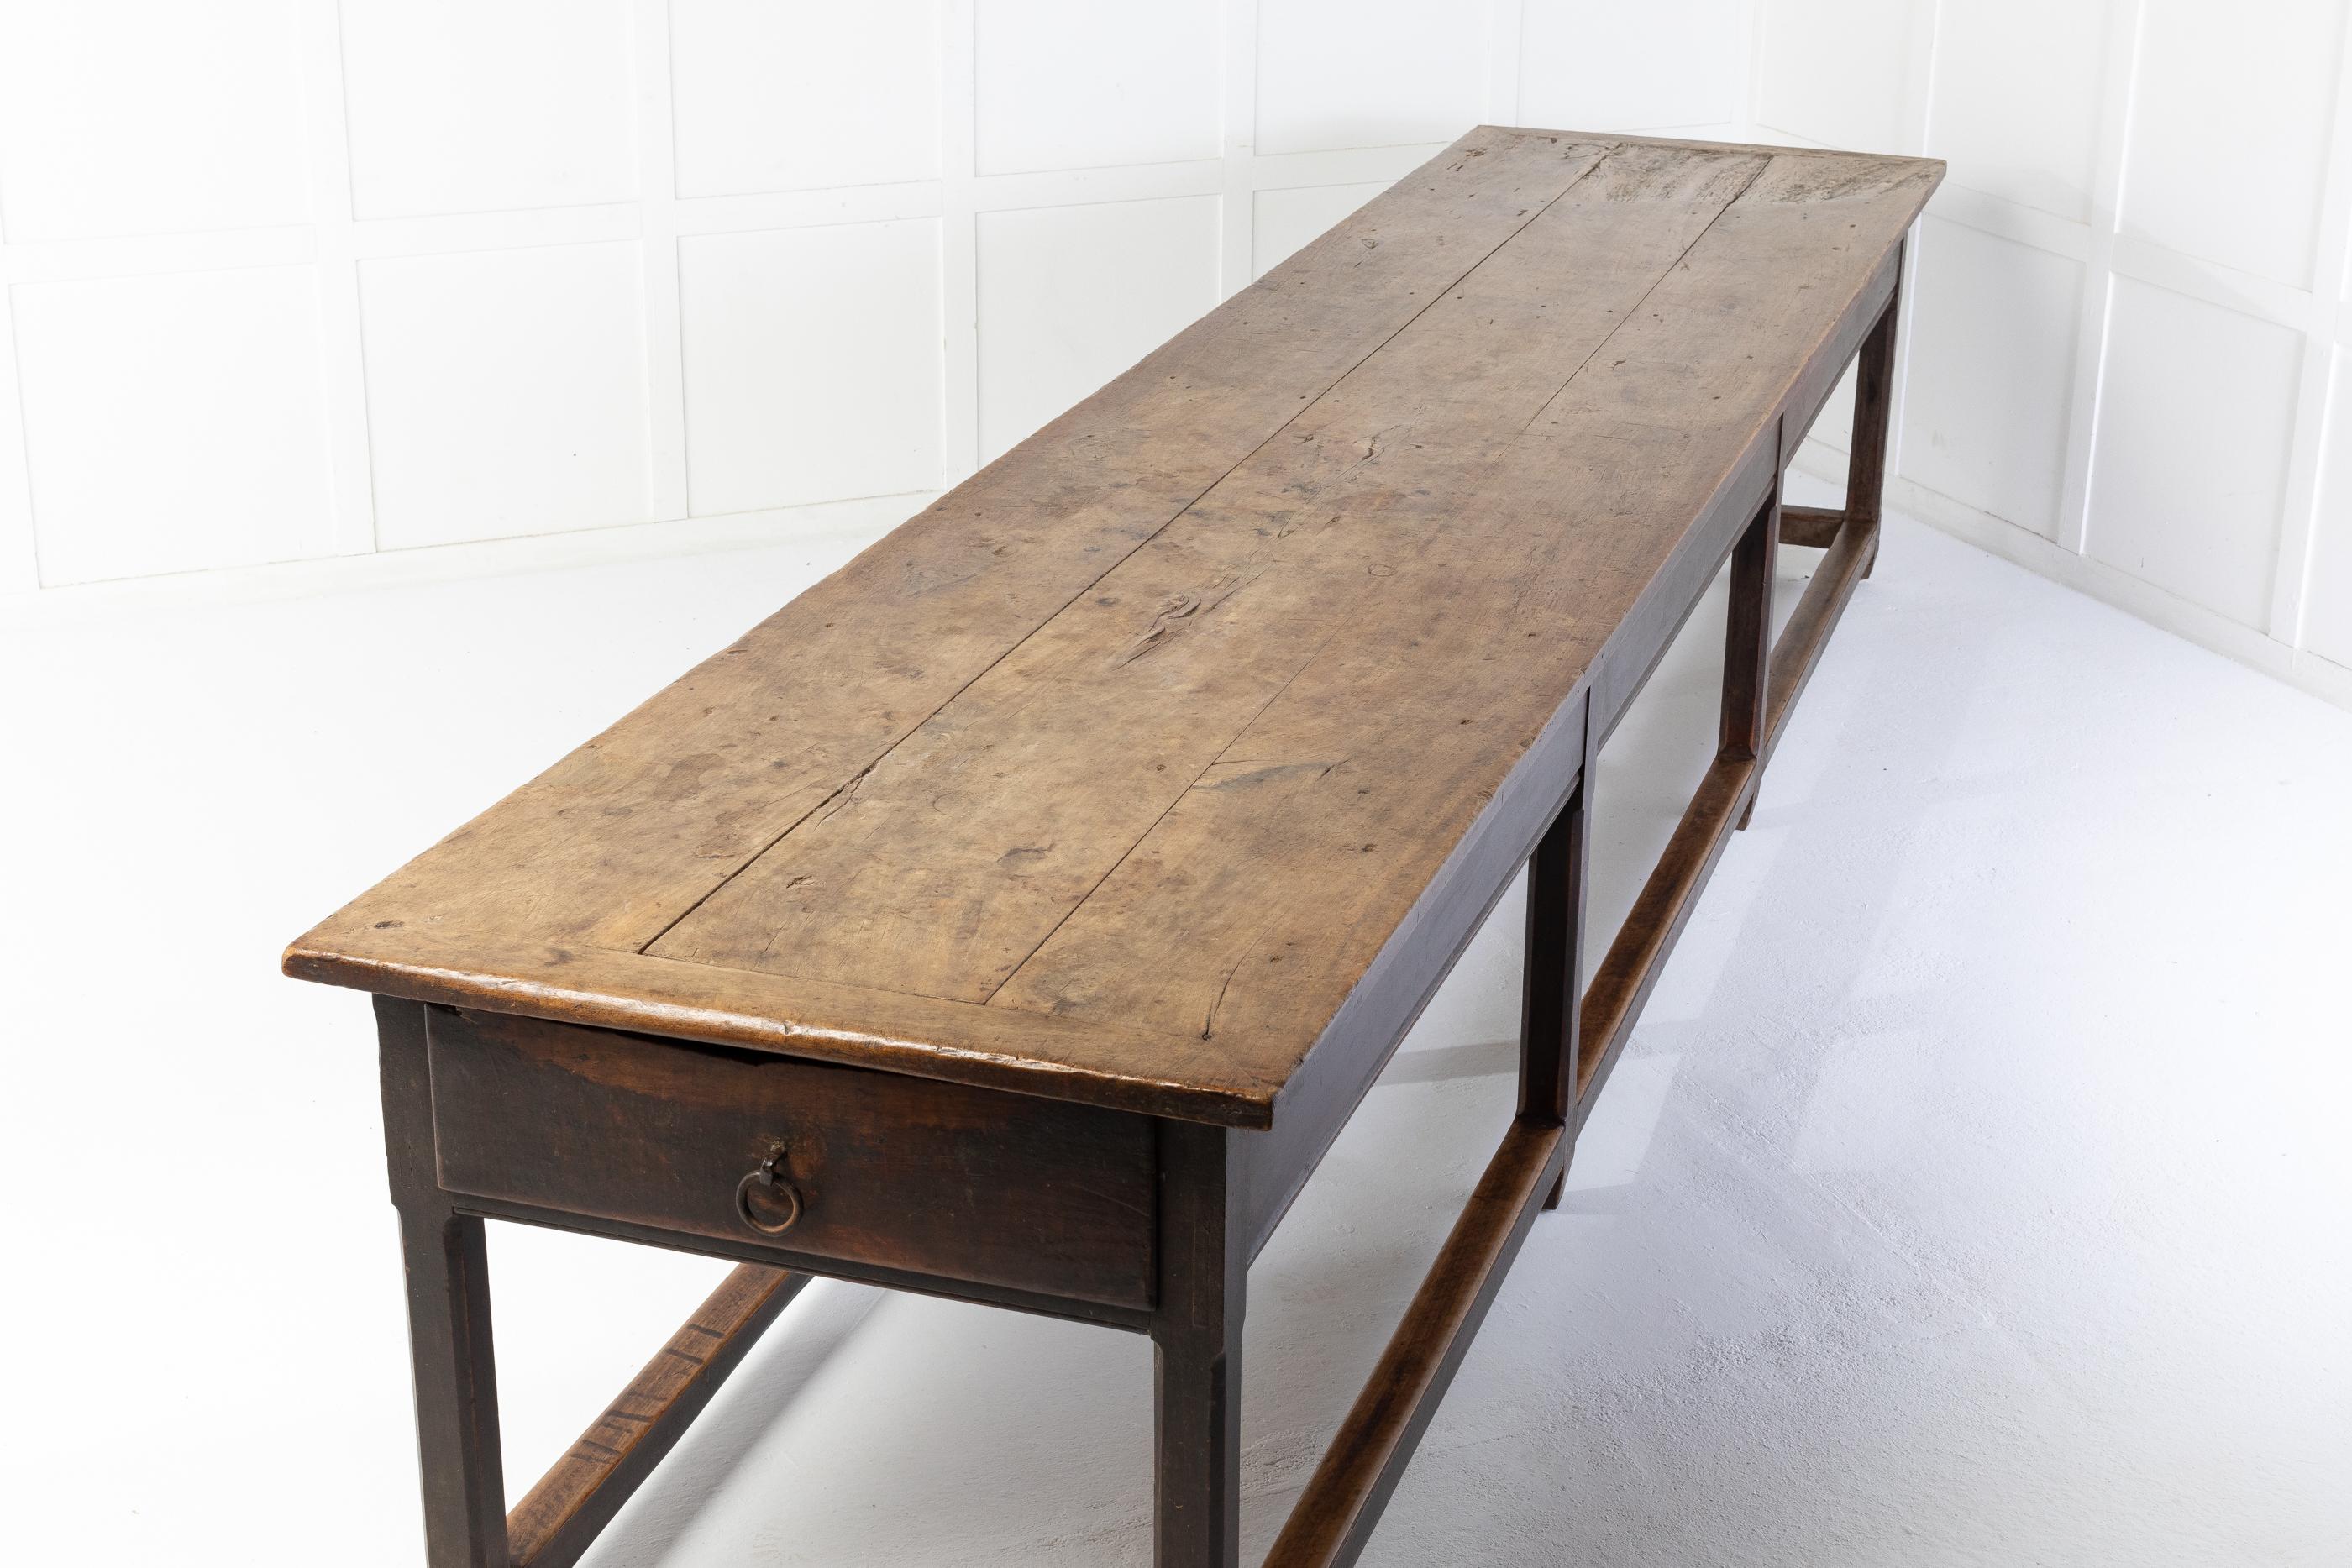 This monumental French 18th century table is over four metres long. An outstanding table retaining its original paint colour on the base and original sun bleached top. Having a single drawer at one end with its original handle. Four leg supports to